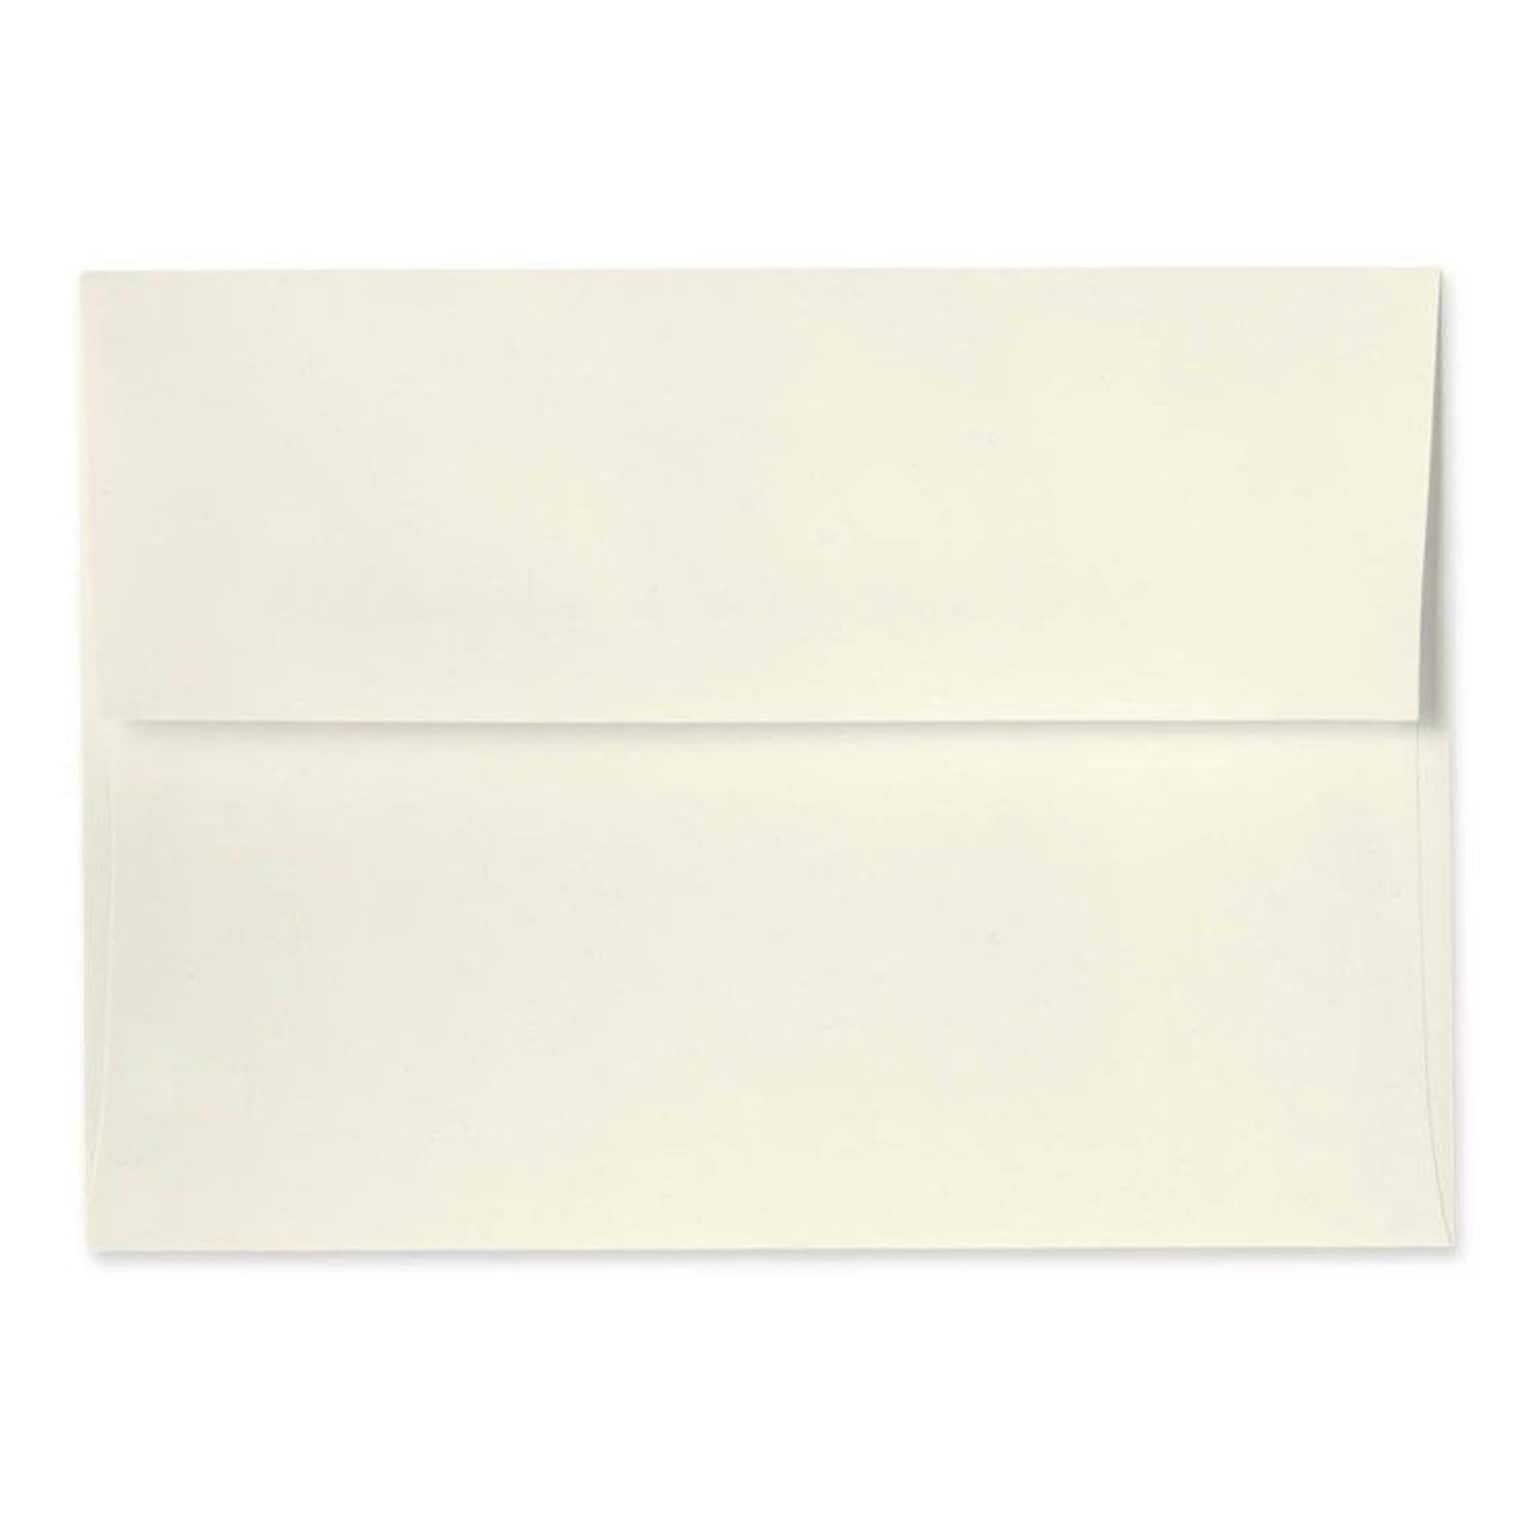 LUX 80lbs. 5 3/4 x 8 3/4 100% Recycled A9 Invitation Envelopes W/Glue, Natural, 250/BX